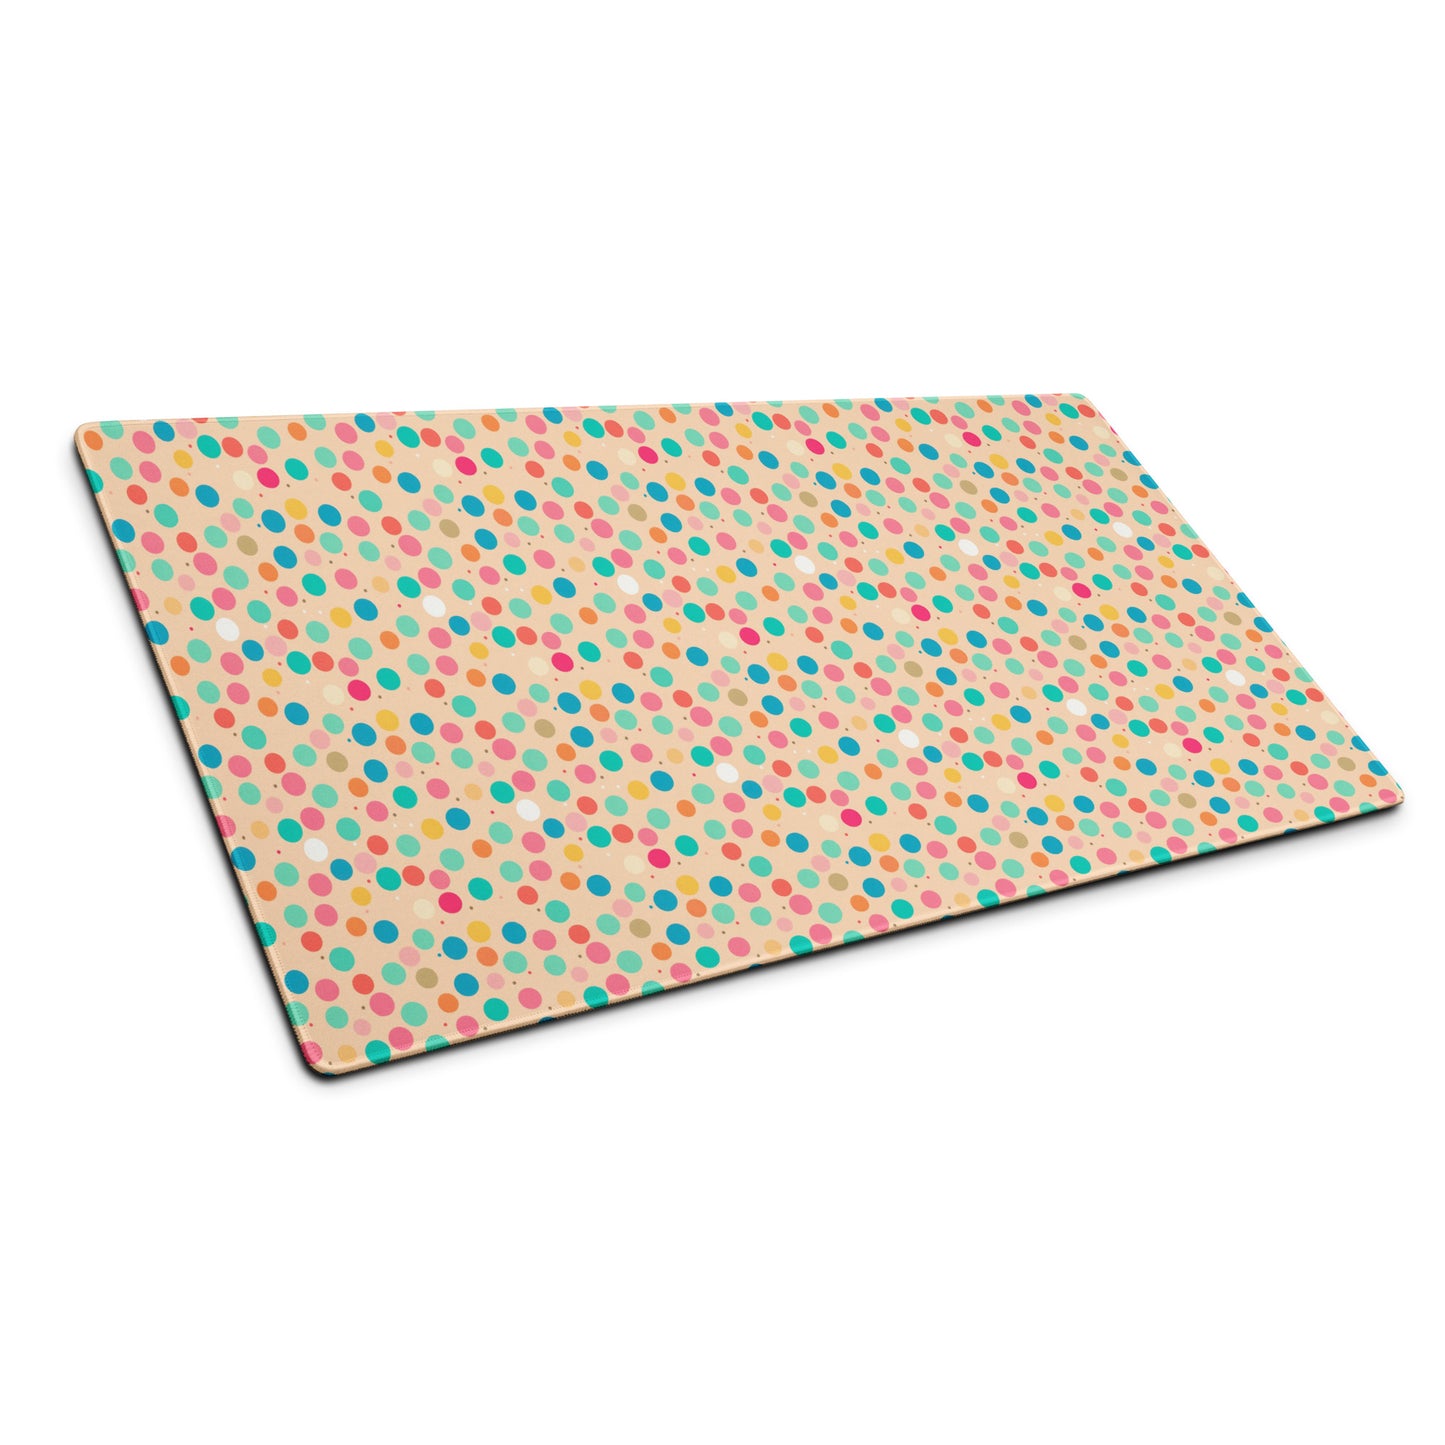 A 36" x 18" desk pad with a colorful polka dot pattern sitting at an angle.